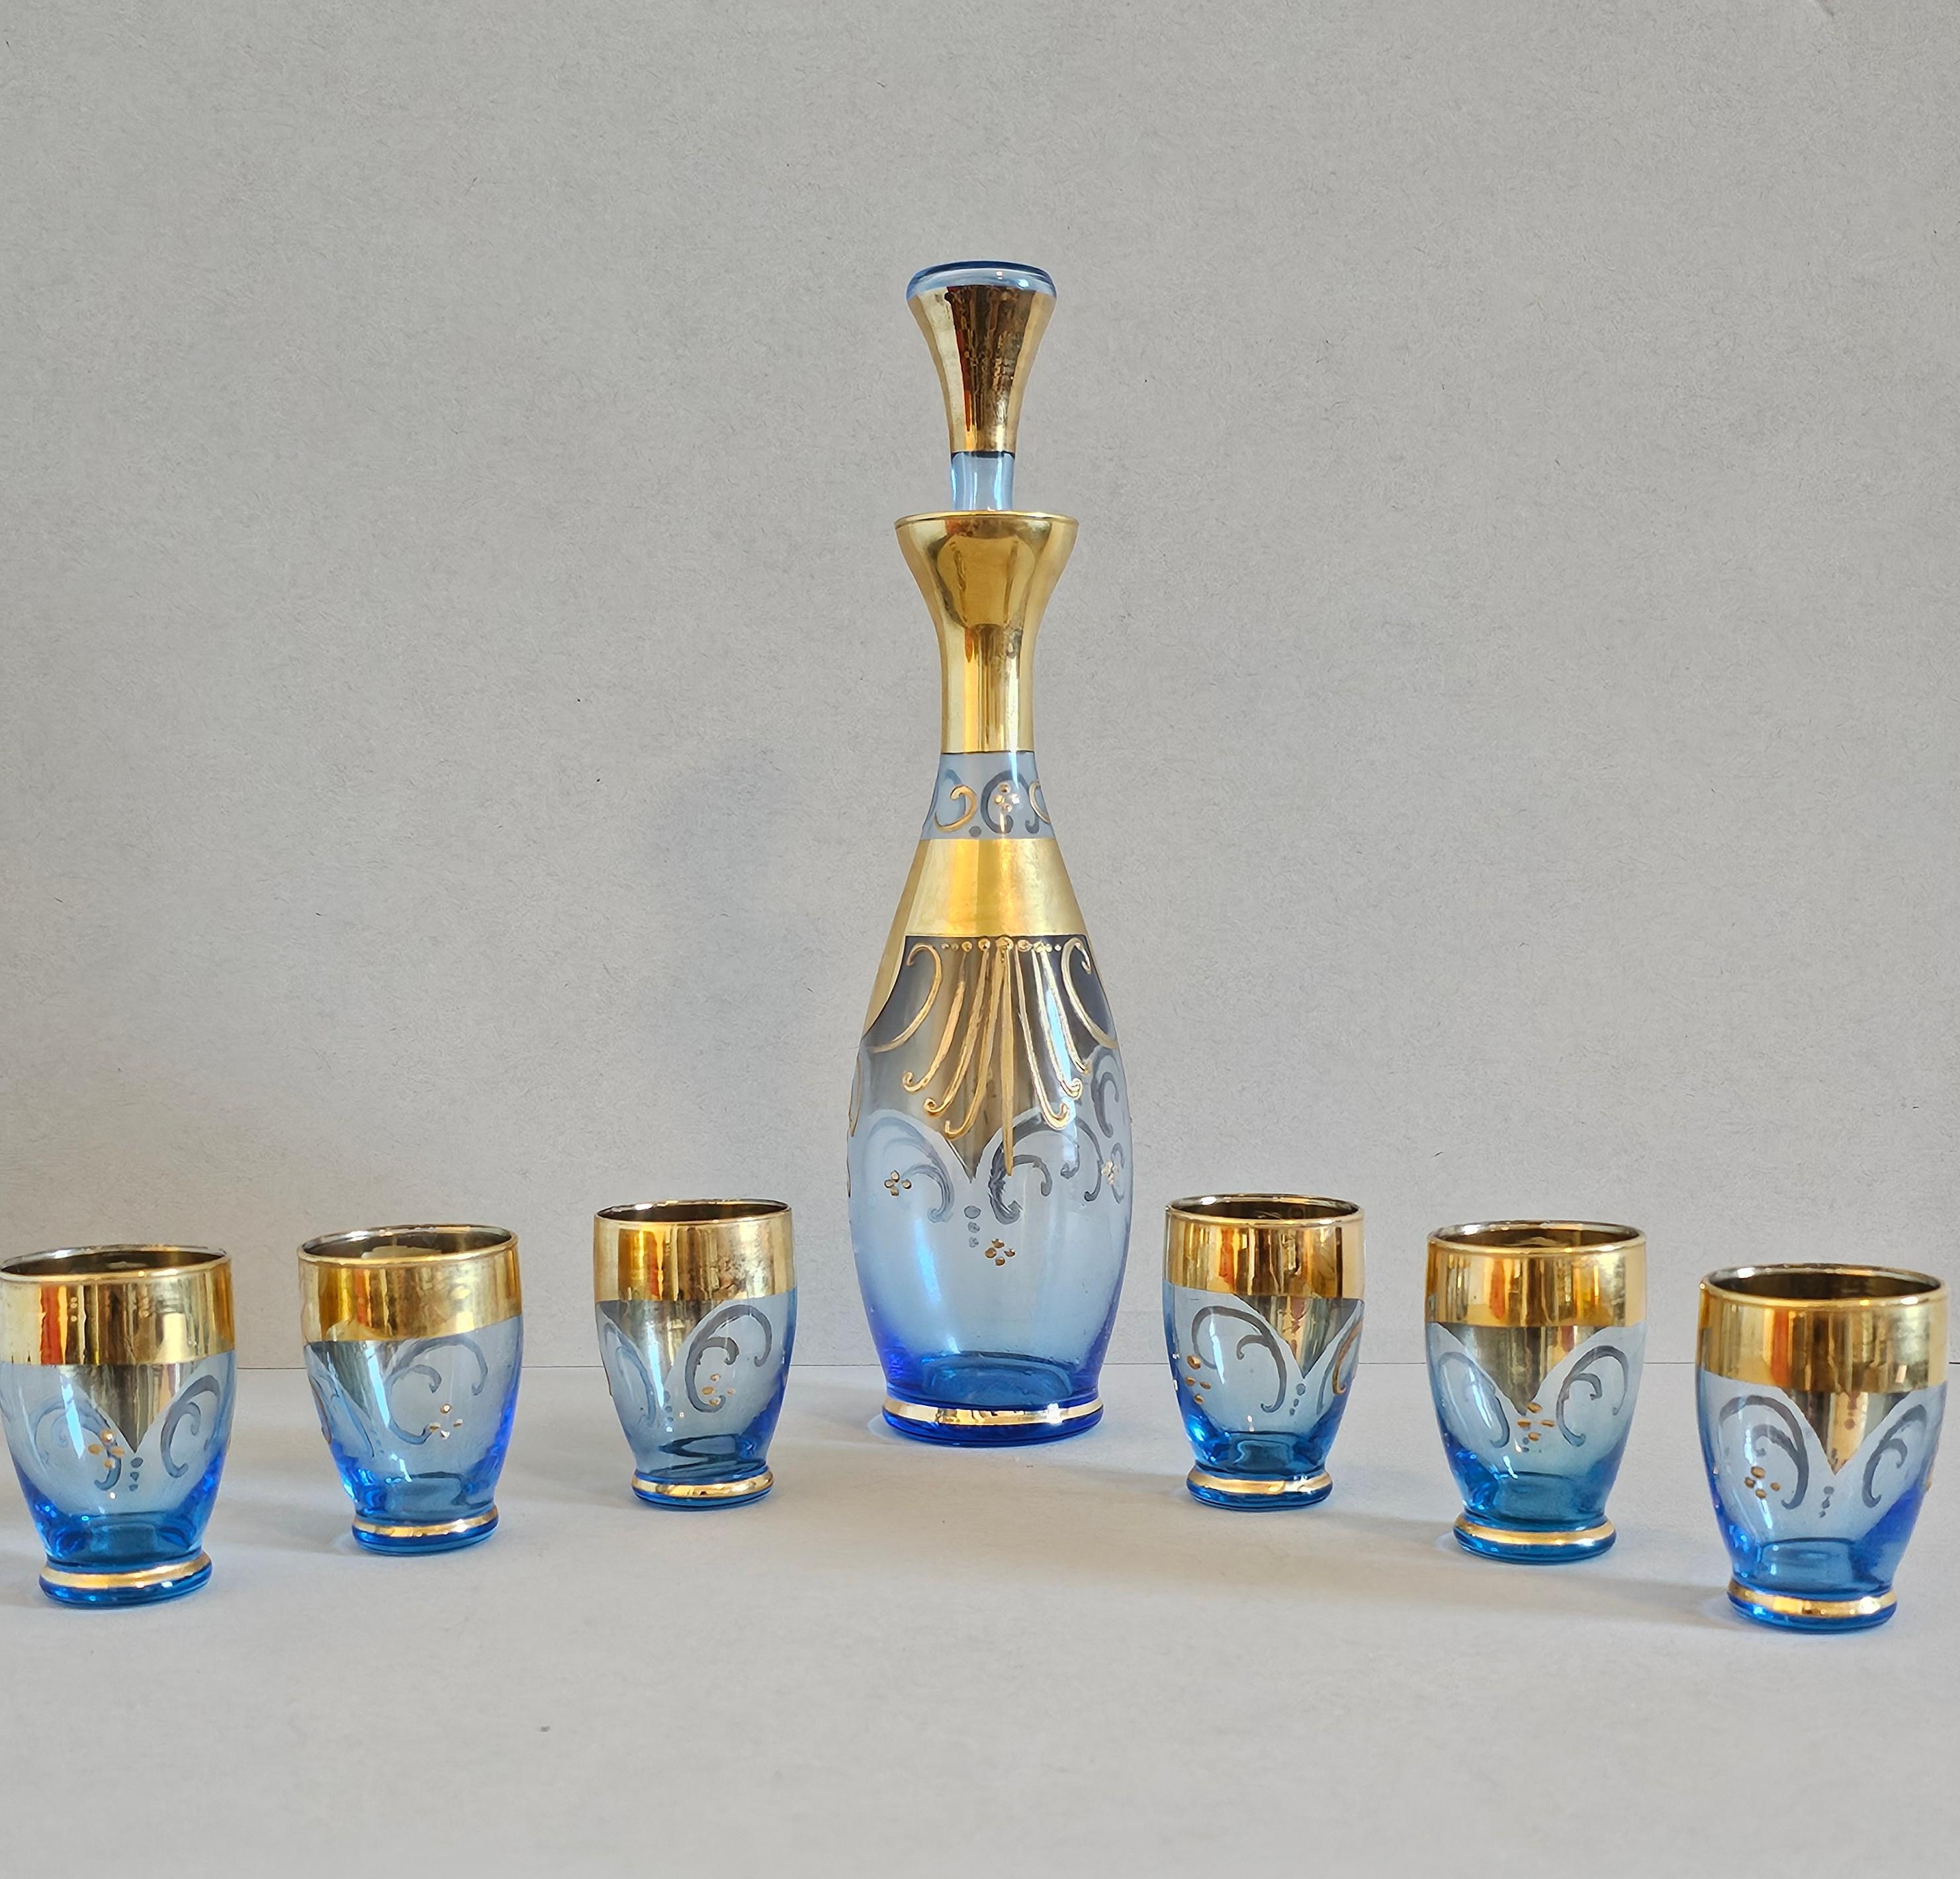 Salviati Murano Gilt Enameled Blue Art Glass Decanter Cordial Liqueur Set In Good Condition For Sale In Forney, TX